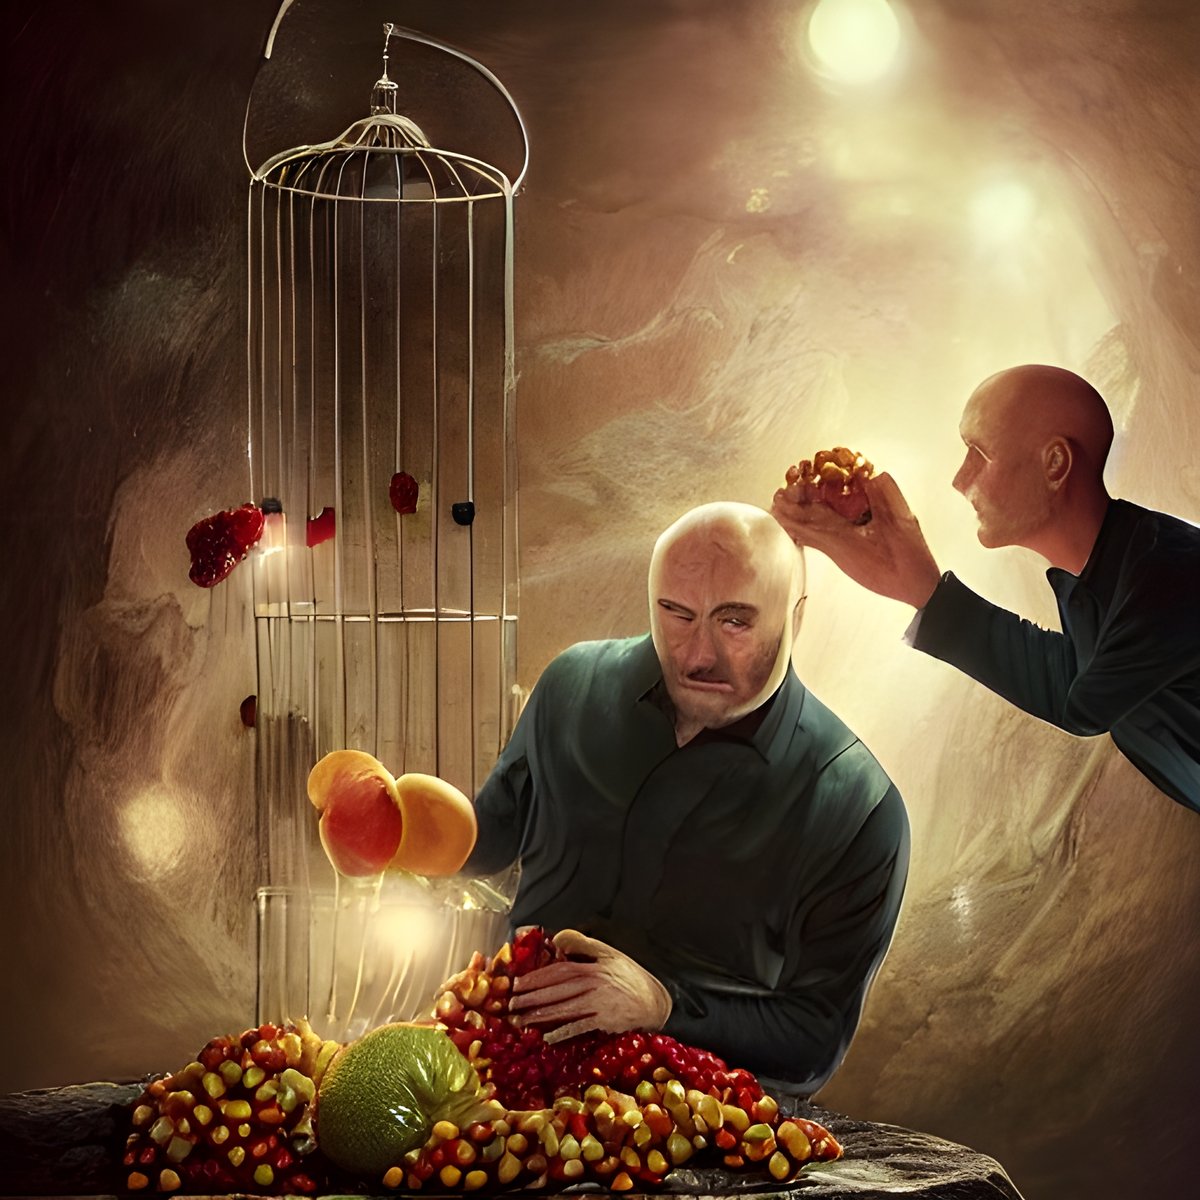 I generated from DeepAI. - 'Fruit Cage'
Phil Collins- This is what you meant by, 'fruit cage'?
Peter Gabriel- But look at all of this fruit, Phil!
#GENESIS #PhilCollins #petergabriel #TheGreatestOfAllTime #AIart #AI #art #artwork #funny #laugh #PinkFloyd #EricClapton #EltonJohn